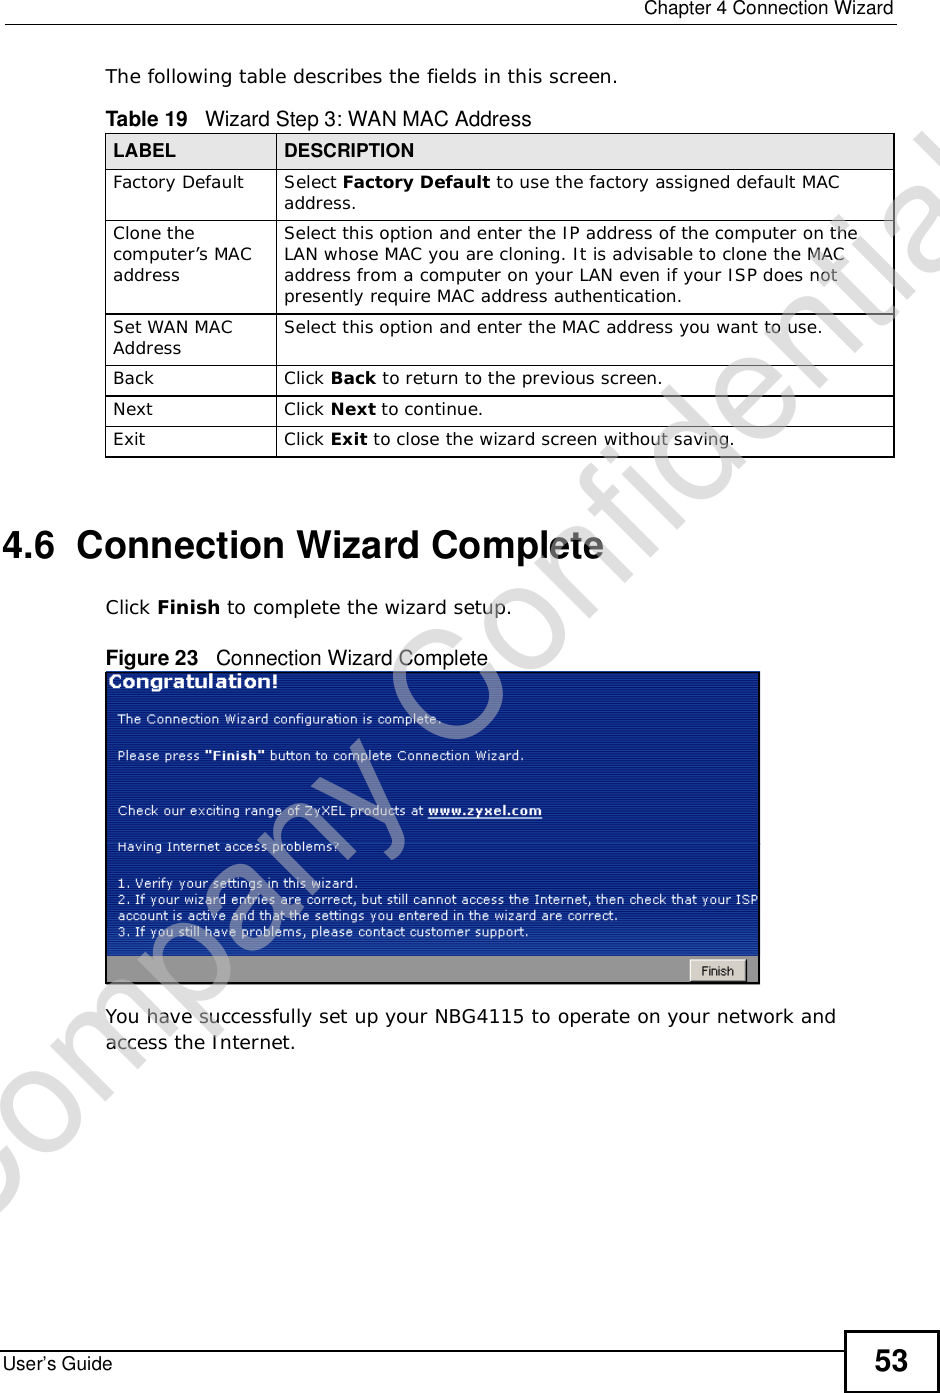  Chapter 4Connection WizardUser’s Guide 53The following table describes the fields in this screen.4.6  Connection Wizard CompleteClick Finish to complete the wizard setup.Figure 23   Connection Wizard CompleteYou have successfully set up your NBG4115 to operate on your network and access the Internet.Table 19   Wizard Step 3: WAN MAC AddressLABEL DESCRIPTIONFactory DefaultSelect Factory Default to use the factory assigned default MAC address.Clone the computer’s MAC addressSelect this option and enter the IP address of the computer on the LAN whose MAC you are cloning. It is advisable to clone the MAC address from a computer on your LAN even if your ISP does not presently require MAC address authentication. Set WAN MAC Address Select this option and enter the MAC address you want to use.Back Click Back to return to the previous screen.Next Click Next to continue. Exit Click Exit to close the wizard screen without saving.Company Confidential